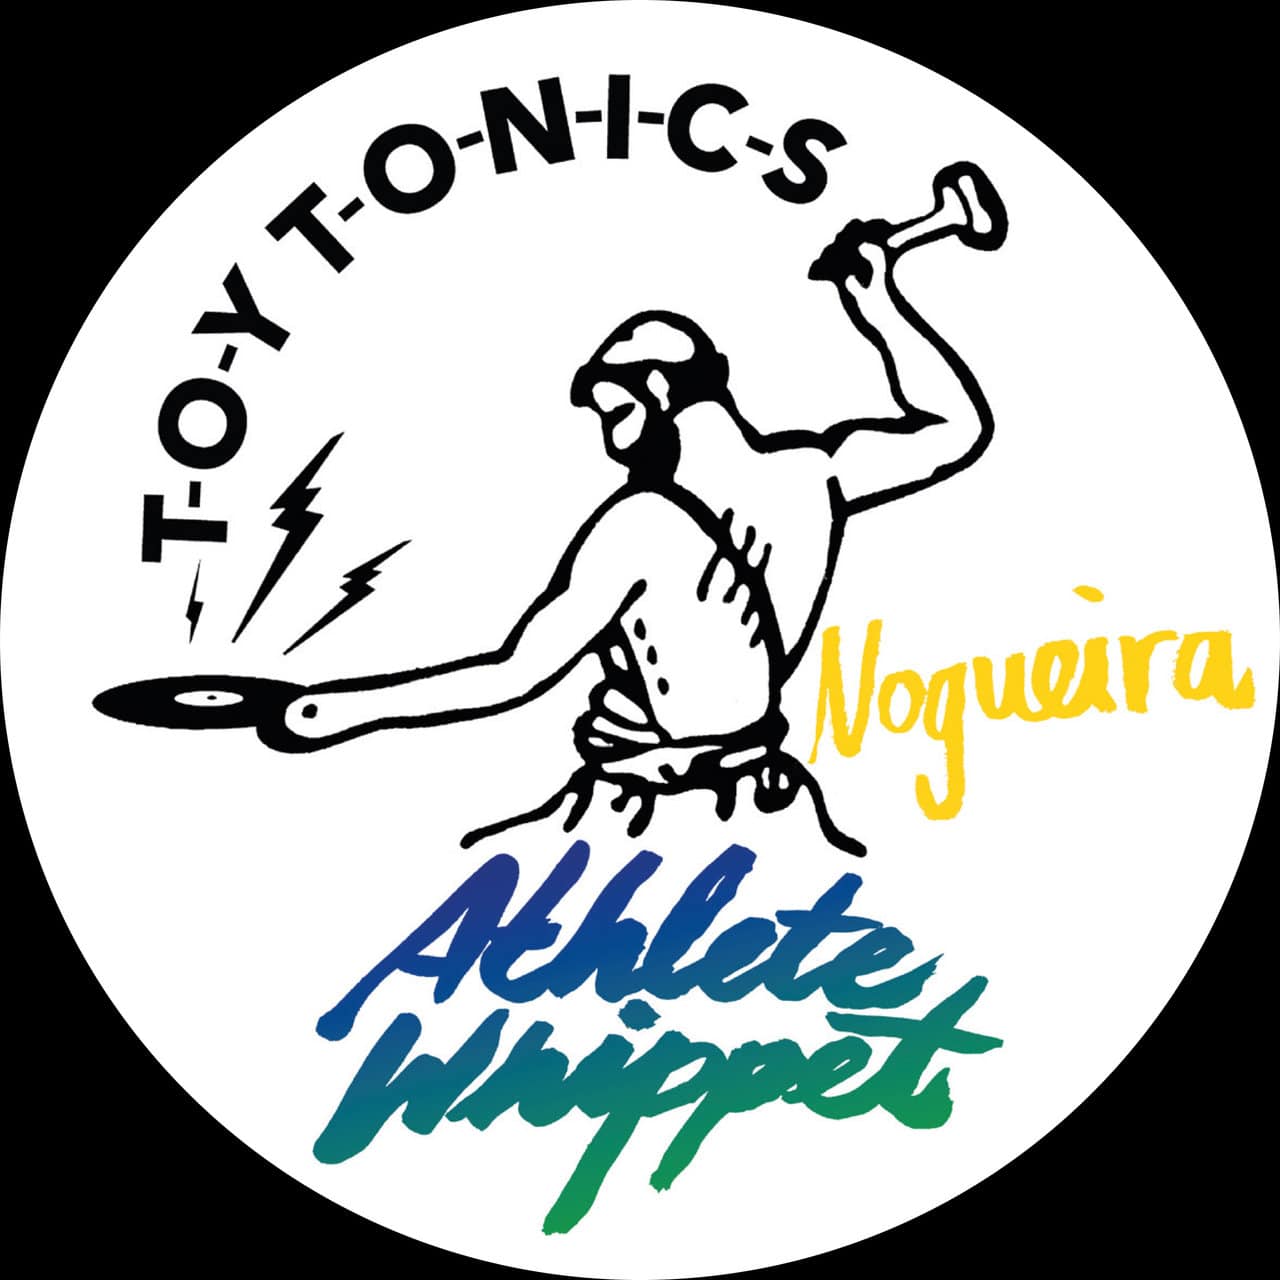 image cover: Athlete Whippet - Nogueira / Toy Tonics